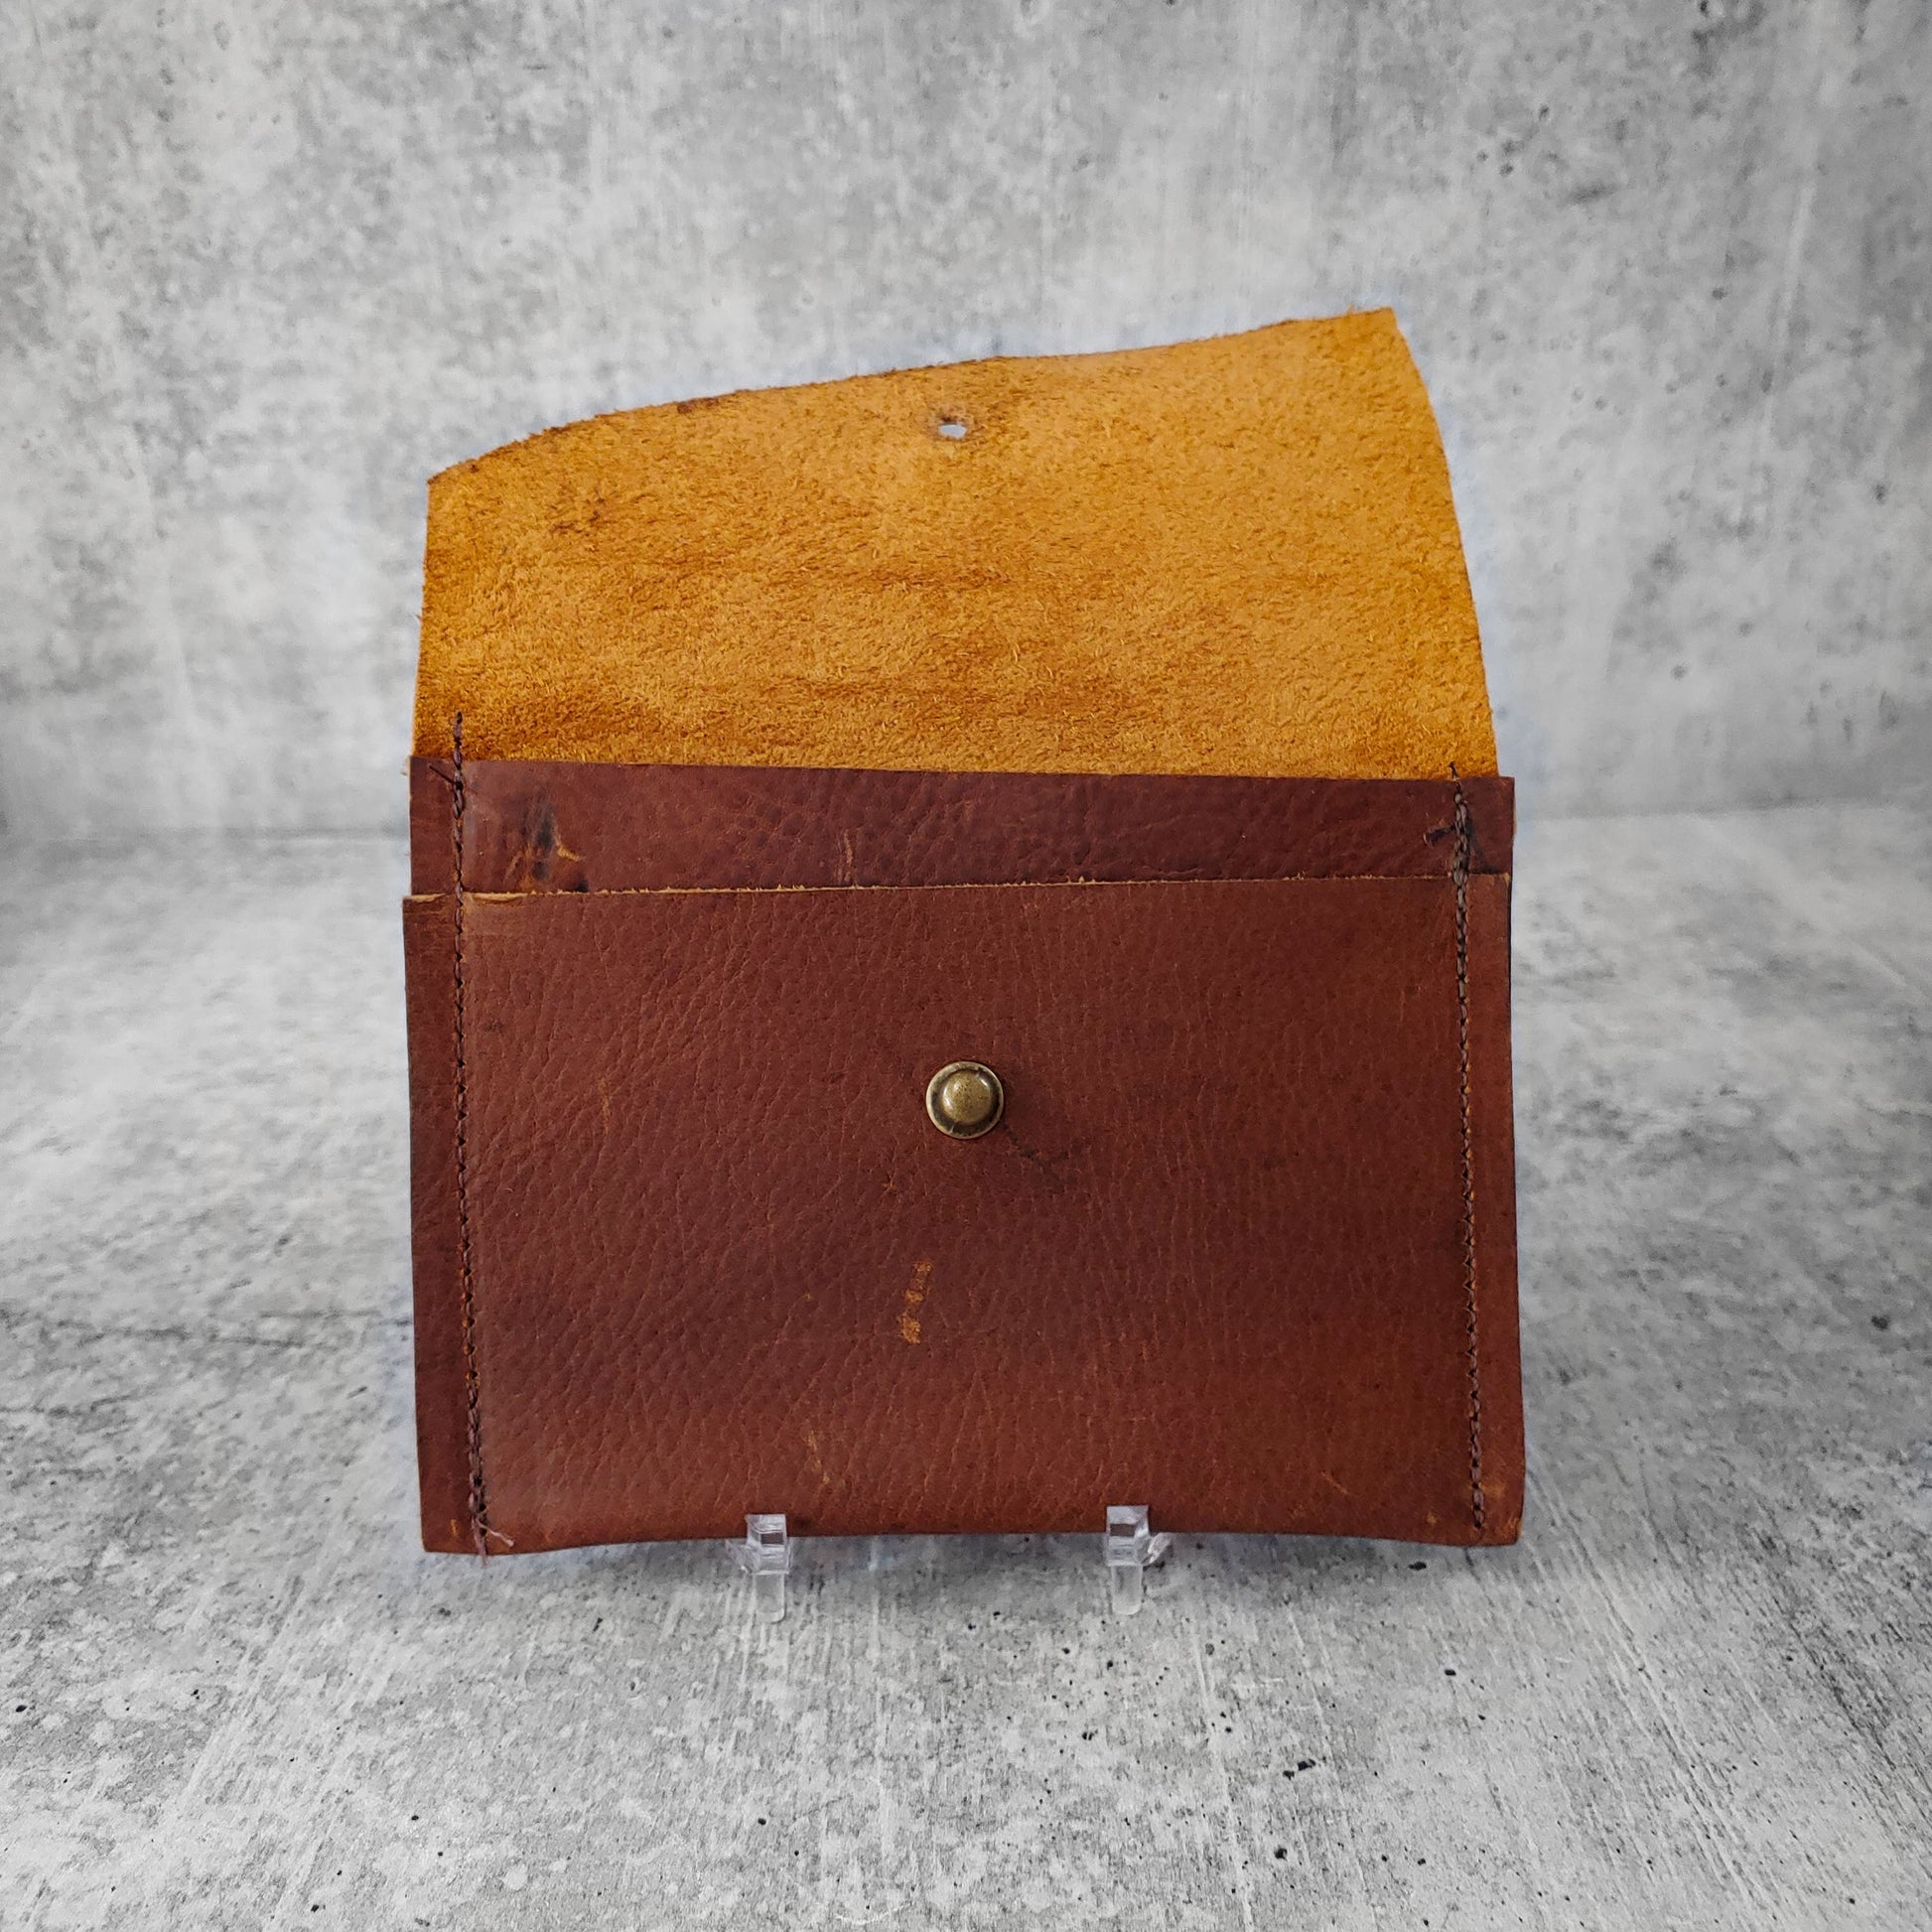 Open, front facing view of "wide leather wallet with asymmetric flap" in kodiak brown against a concrete background. Inside pocket visible.